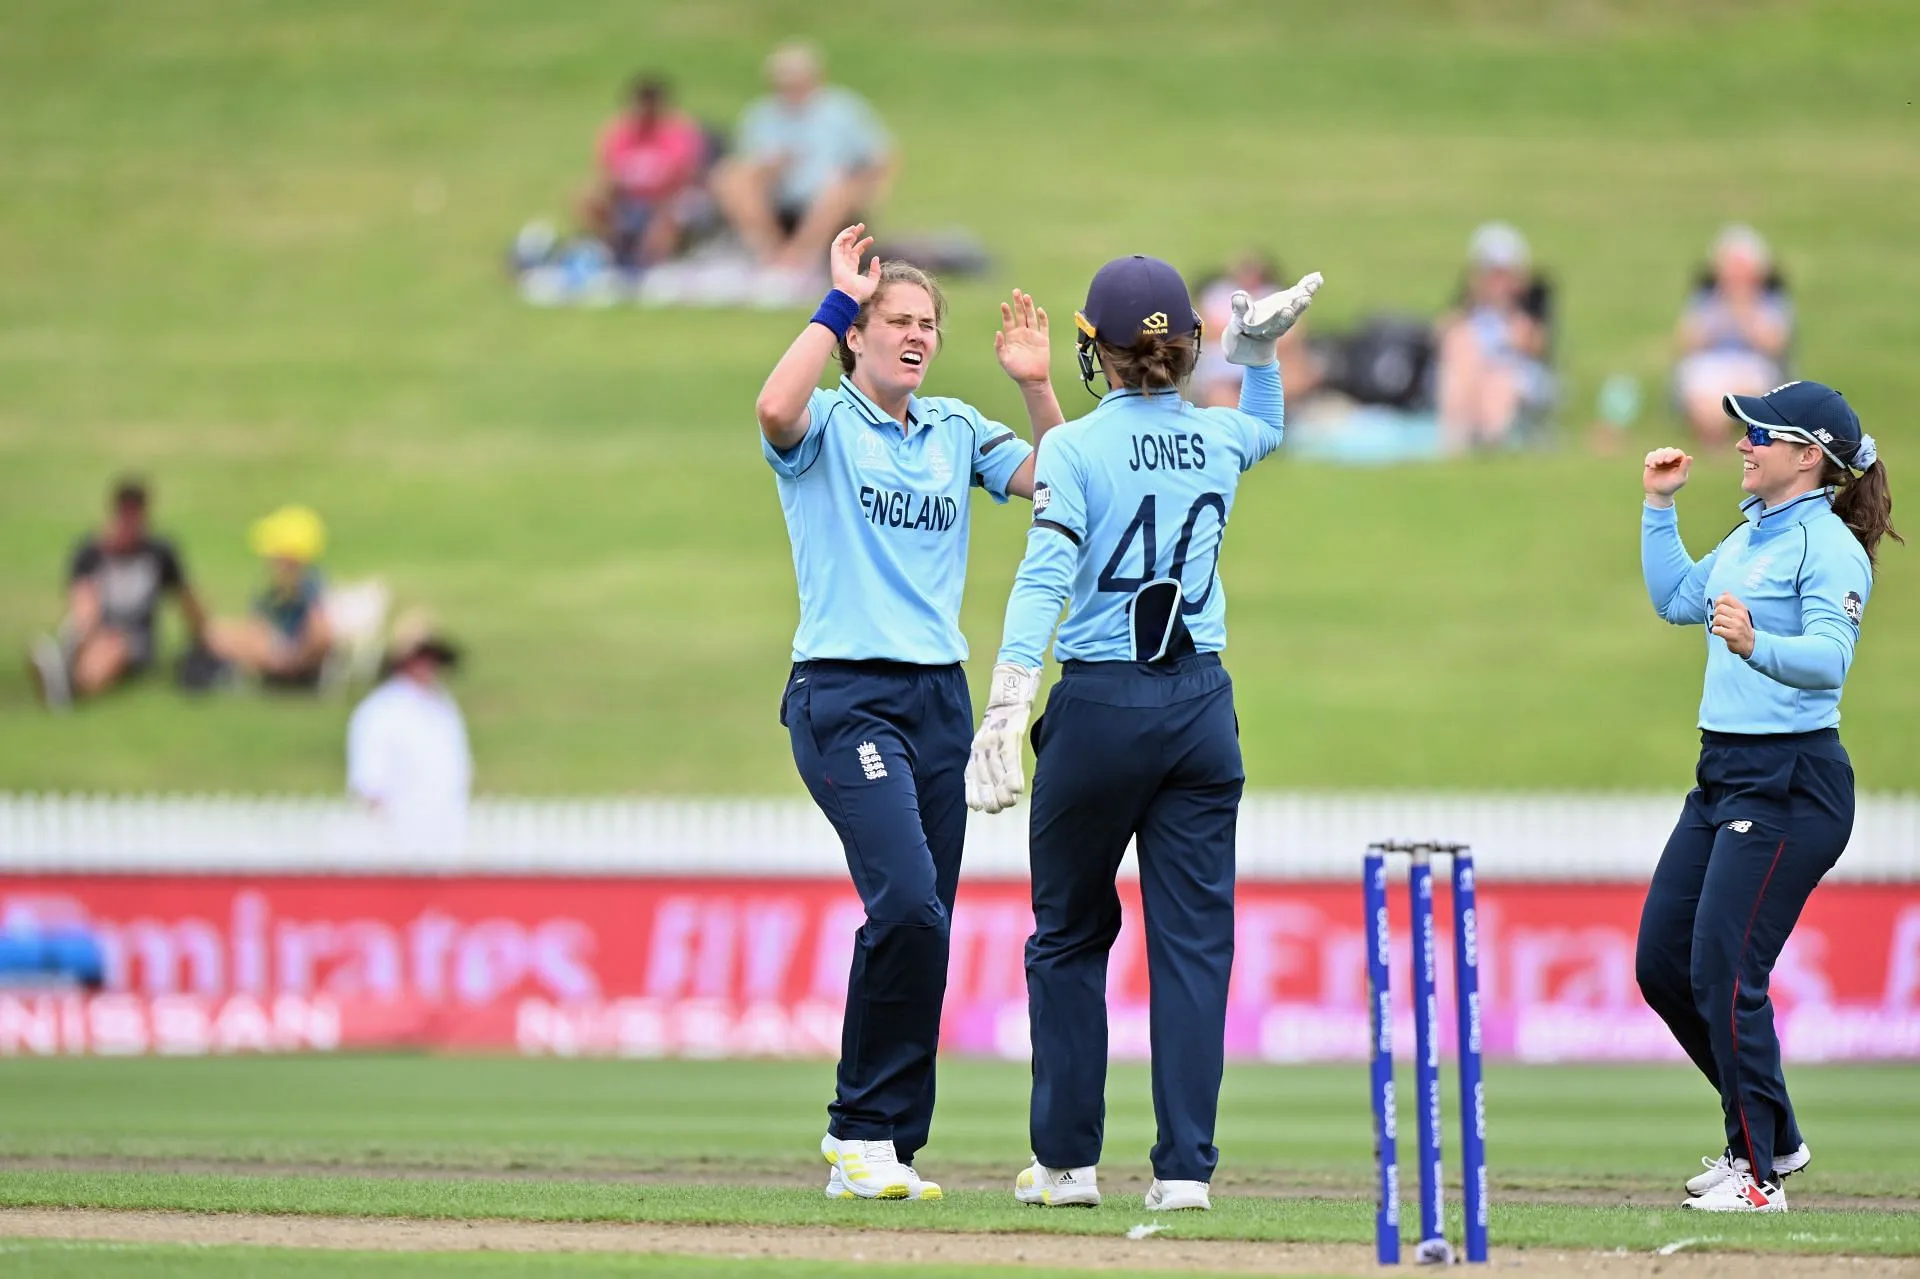 ICC Women's World Cup 2022, Match 15: England Women vs India Women Full Preview, Match Details, Probable XIs, Pitch Report, and Dream11 Team Prediction | SportzPoint.com